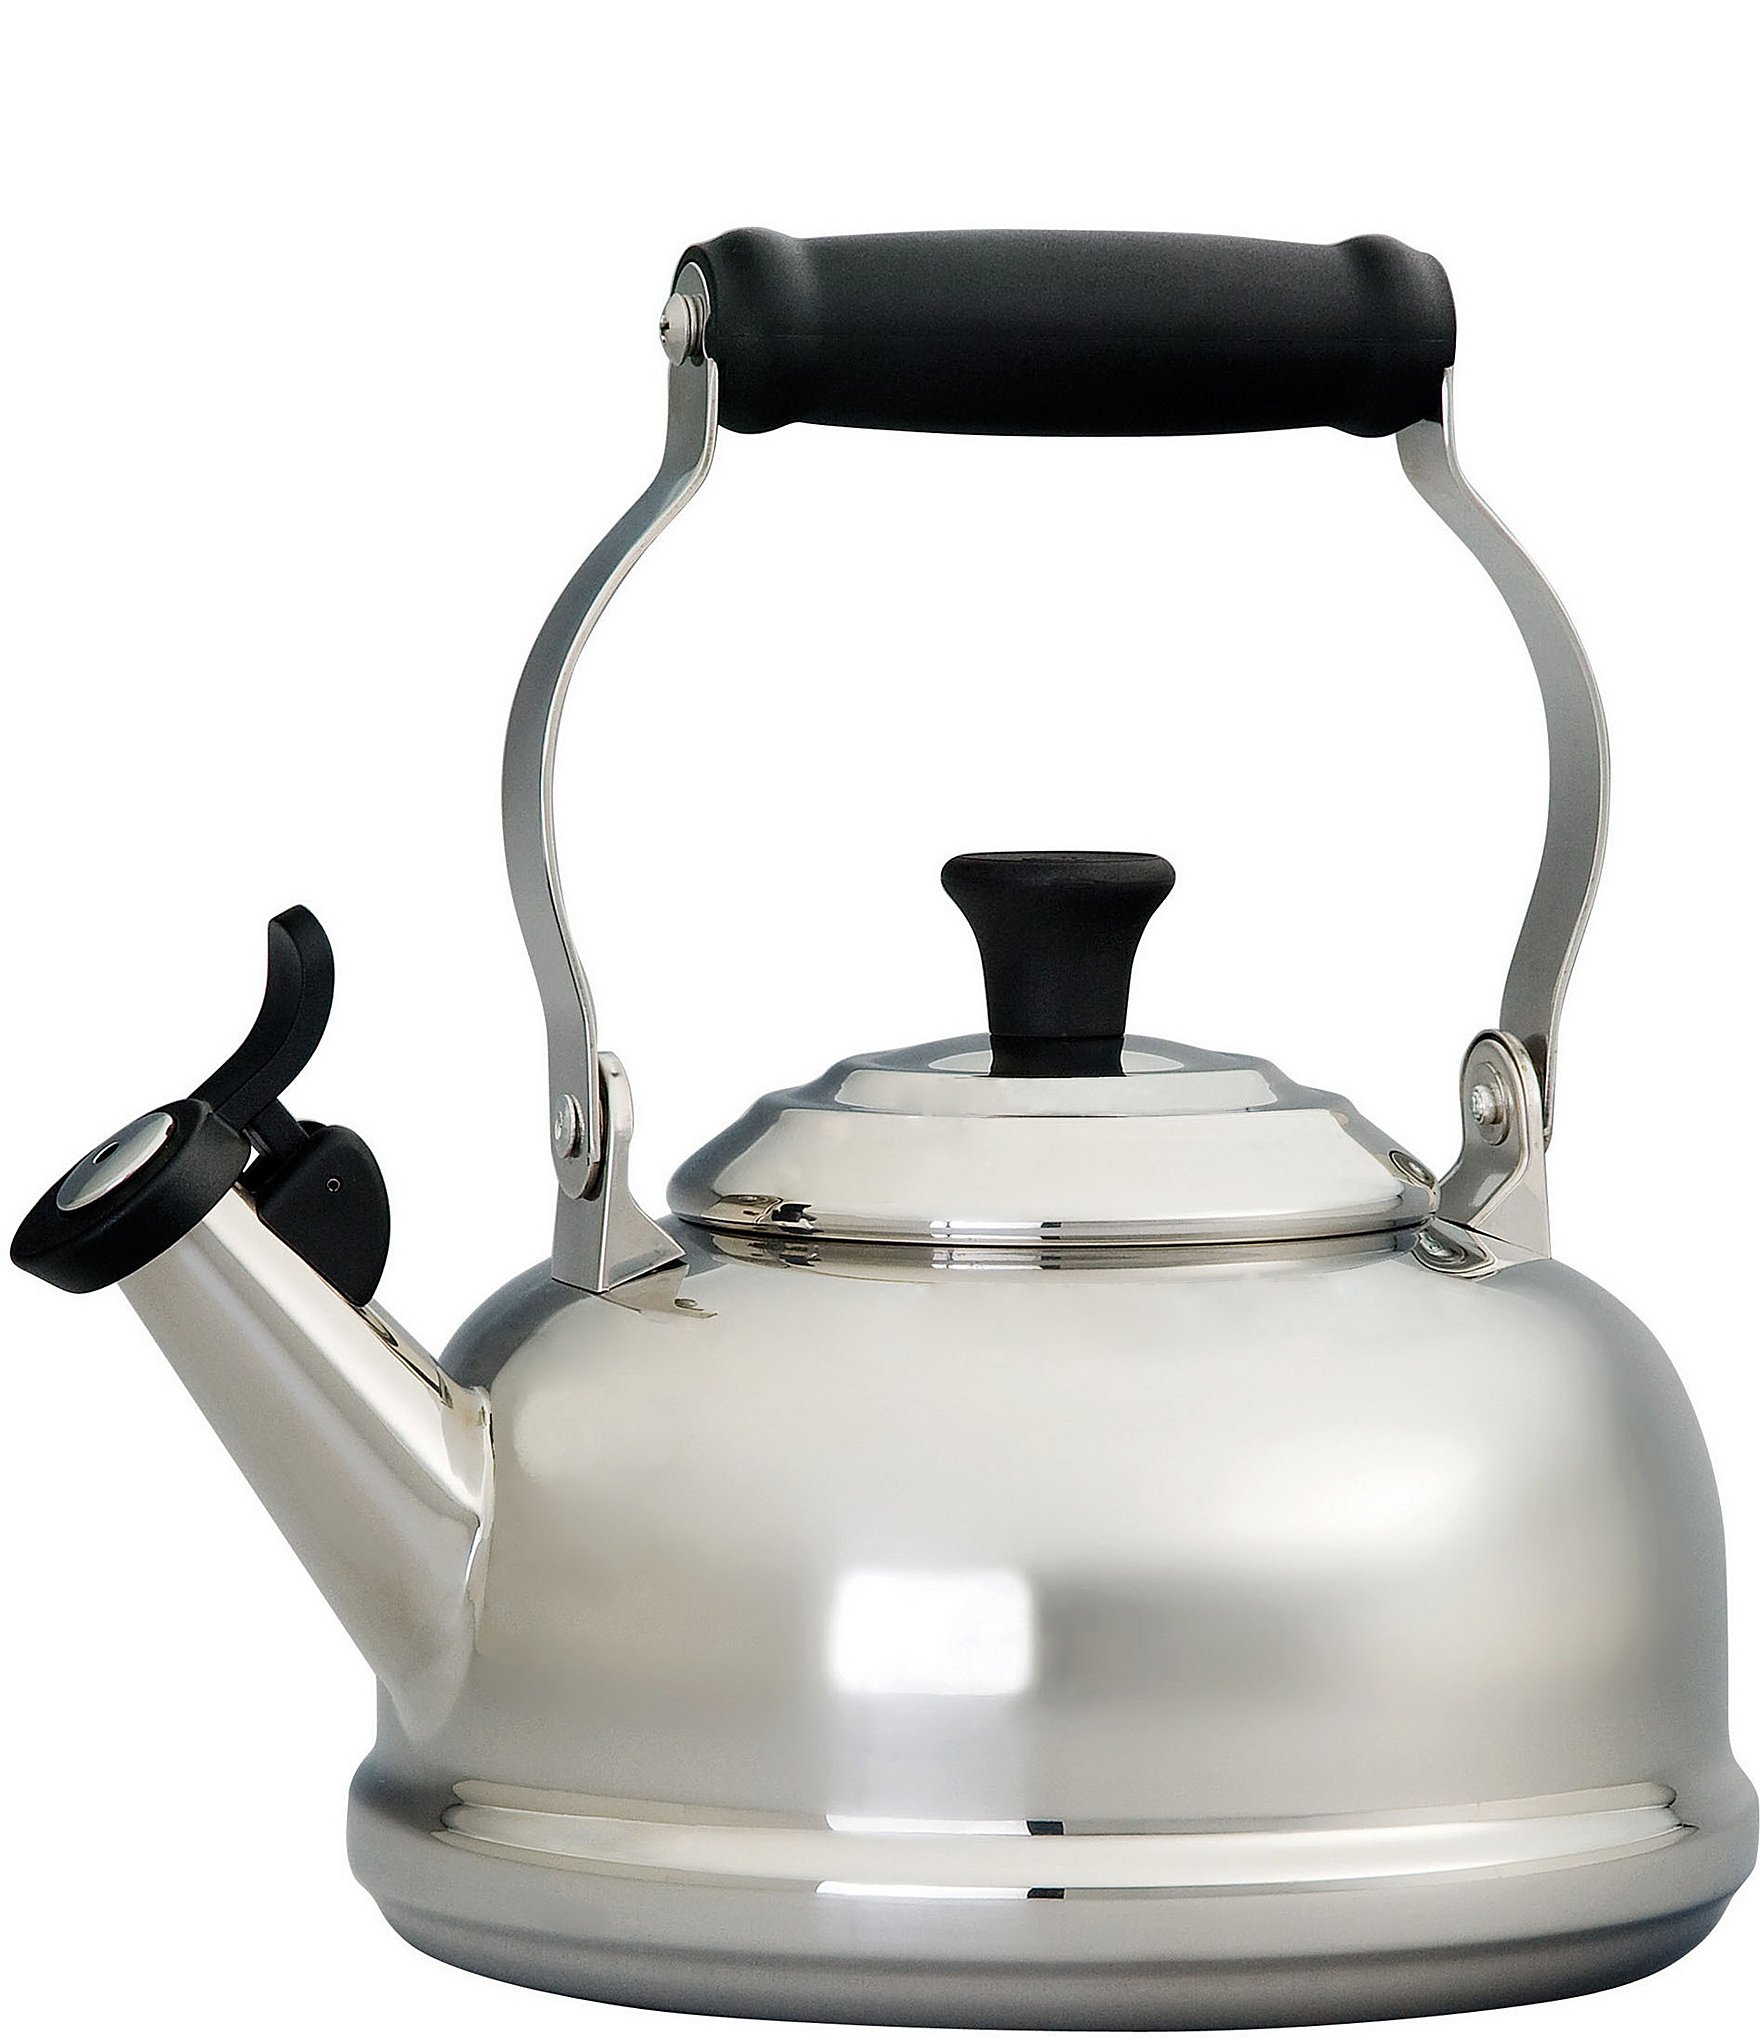 https://dimg.dillards.com/is/image/DillardsZoom/zoom/le-creuset-stainless-steel-classic-whistling-kettle/05521046_zi.jpg